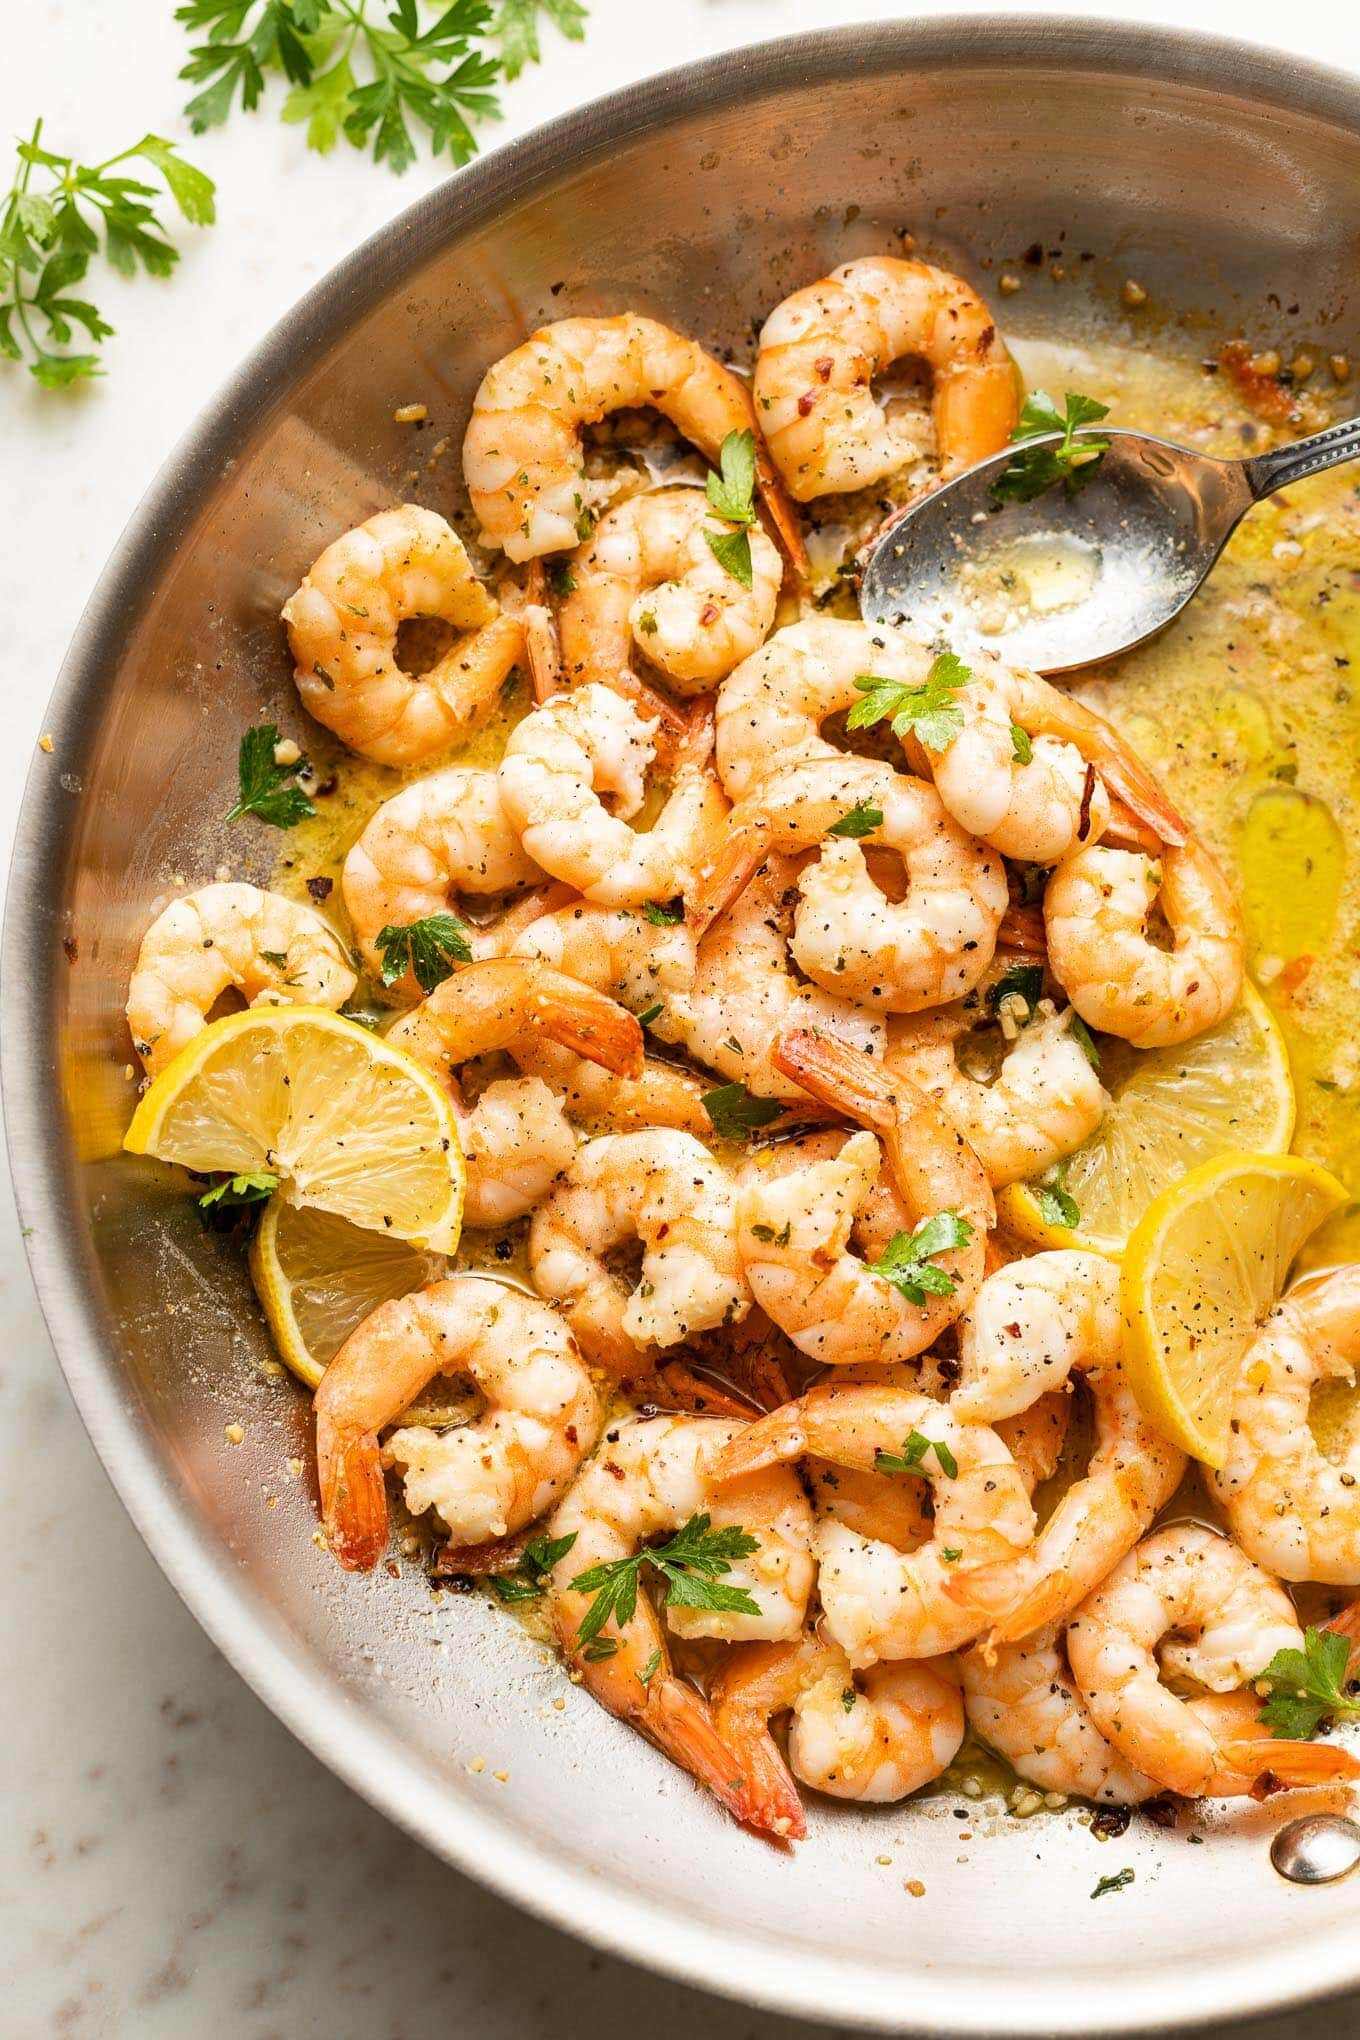 How To Saute Shrimp In Butter And Garlic Powder - Recipes.net